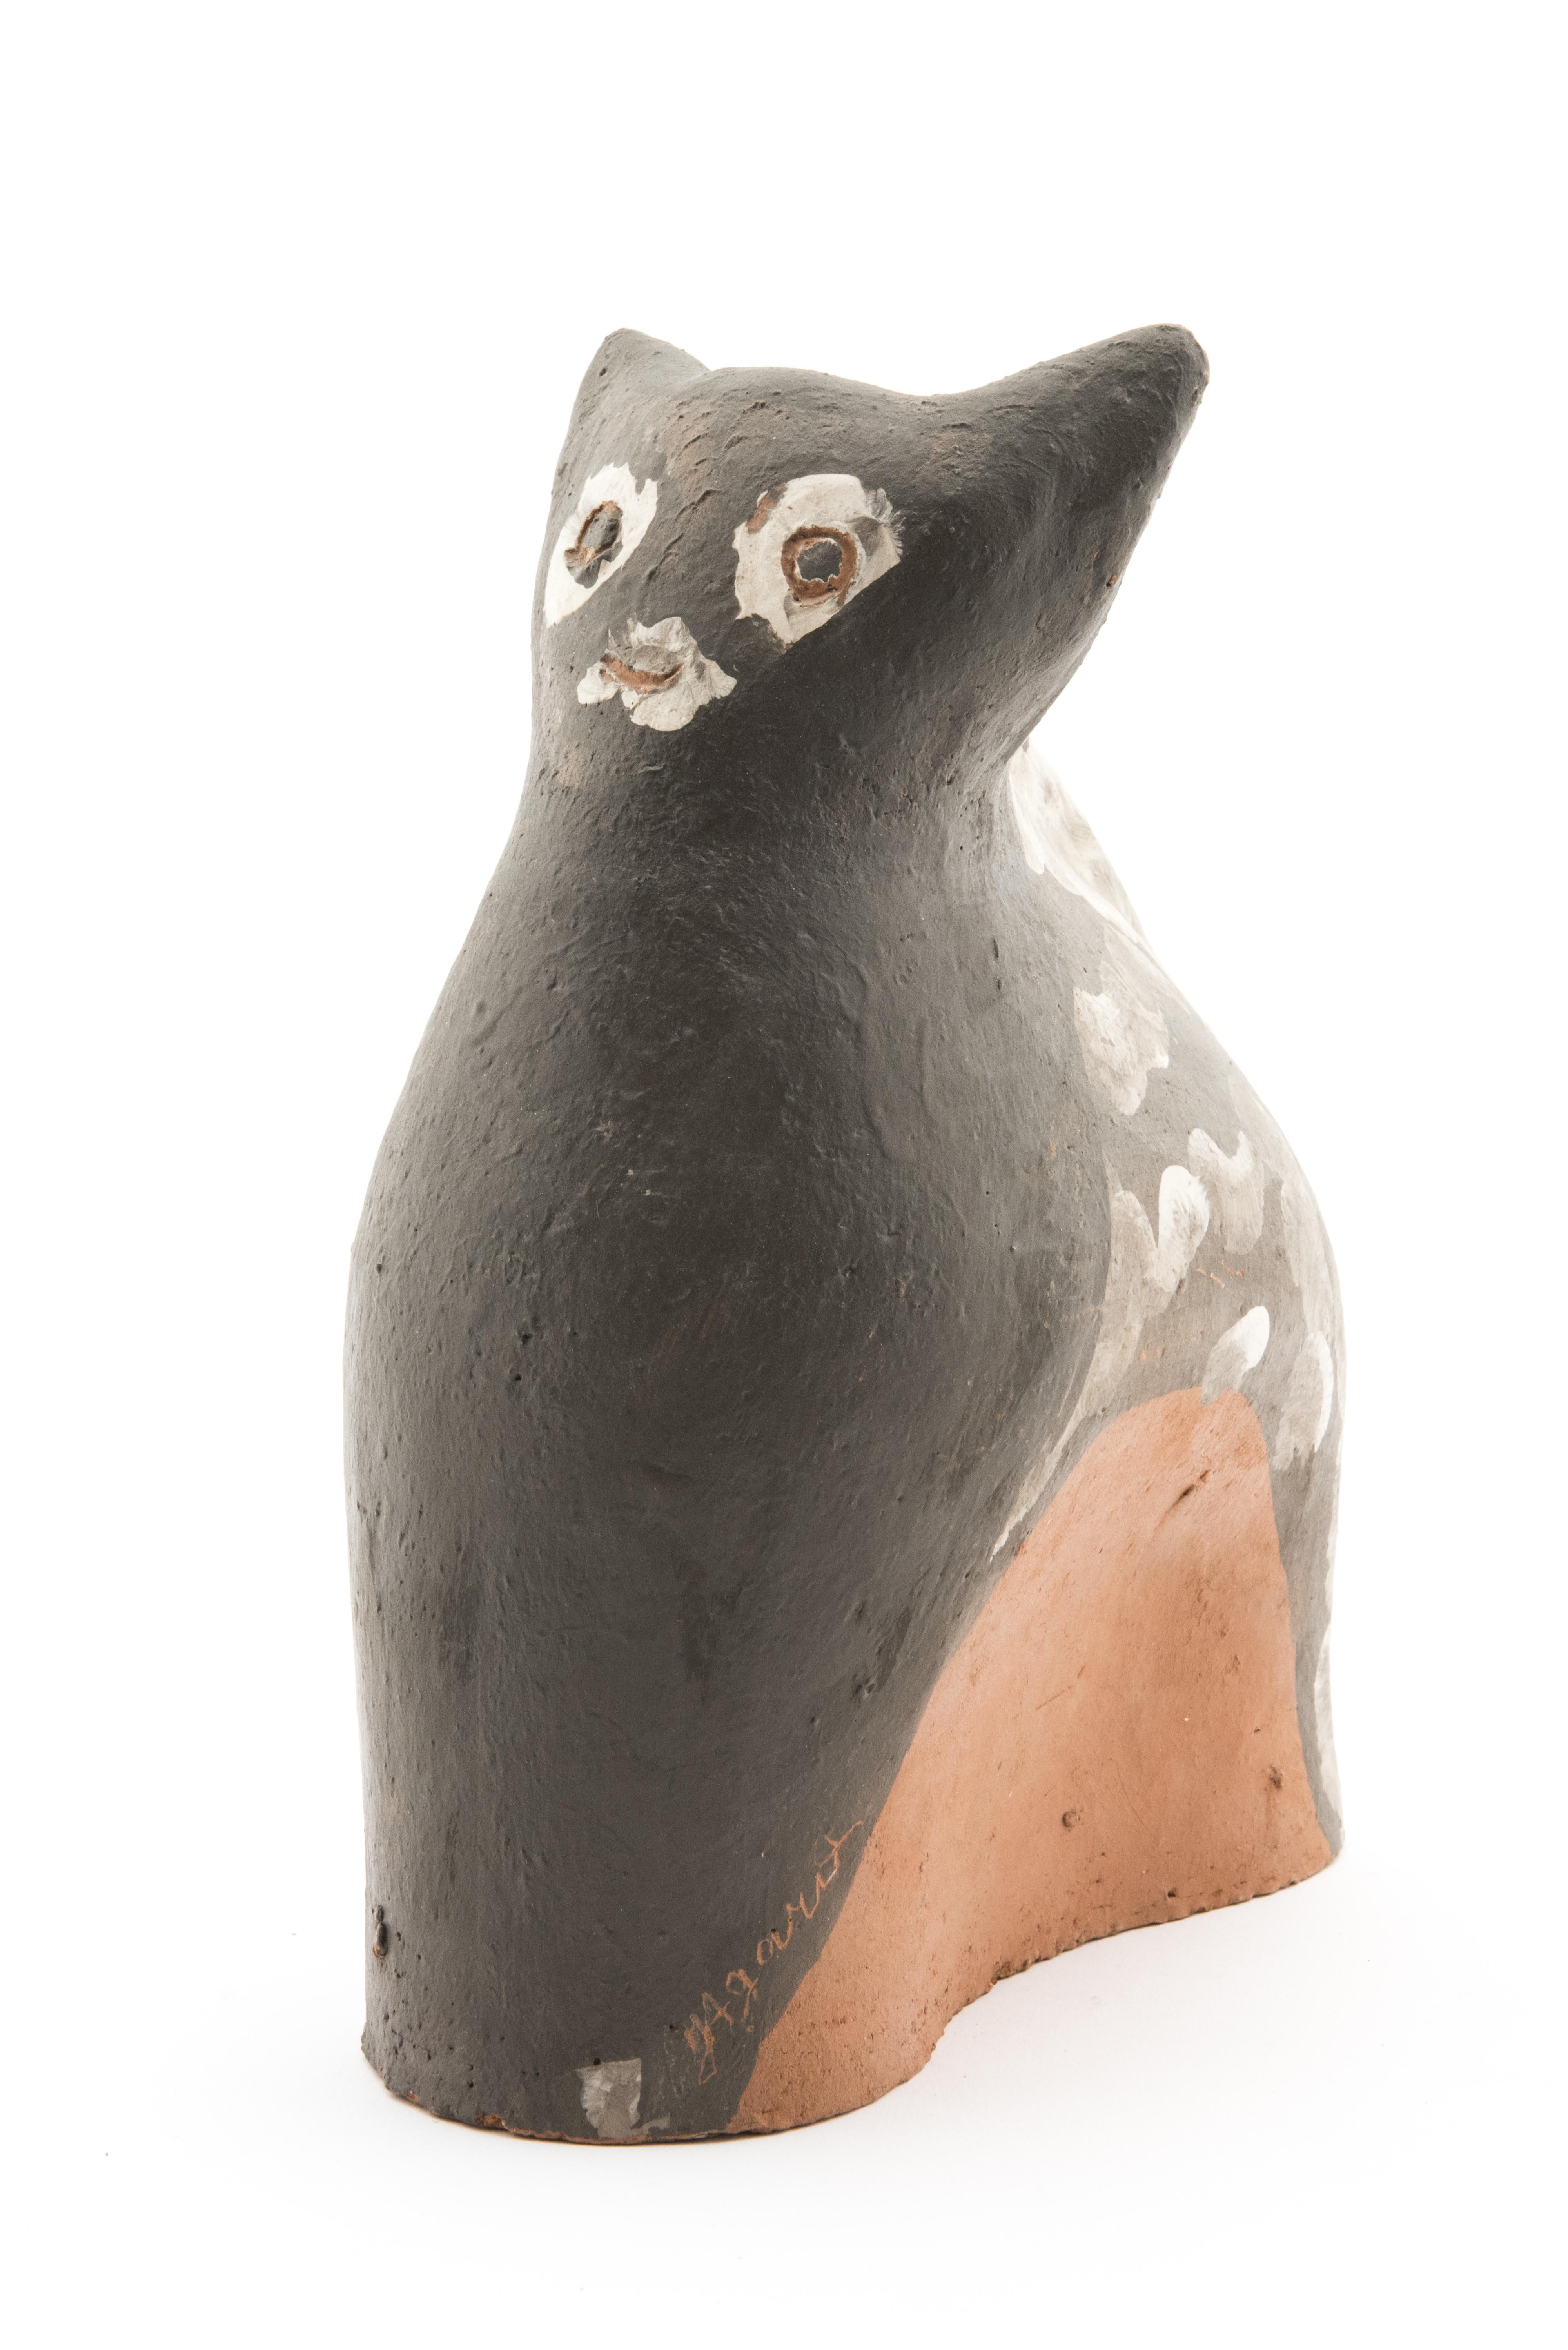 Figurative sculpture, resembling a cat in Vallauris terracotta by Jules Agard in the 1950s.
Decoratie object by one of most renowned masters among his peers at the time of Vallauris. 

About the artist 
Jules Agard (1905-1986) was a French